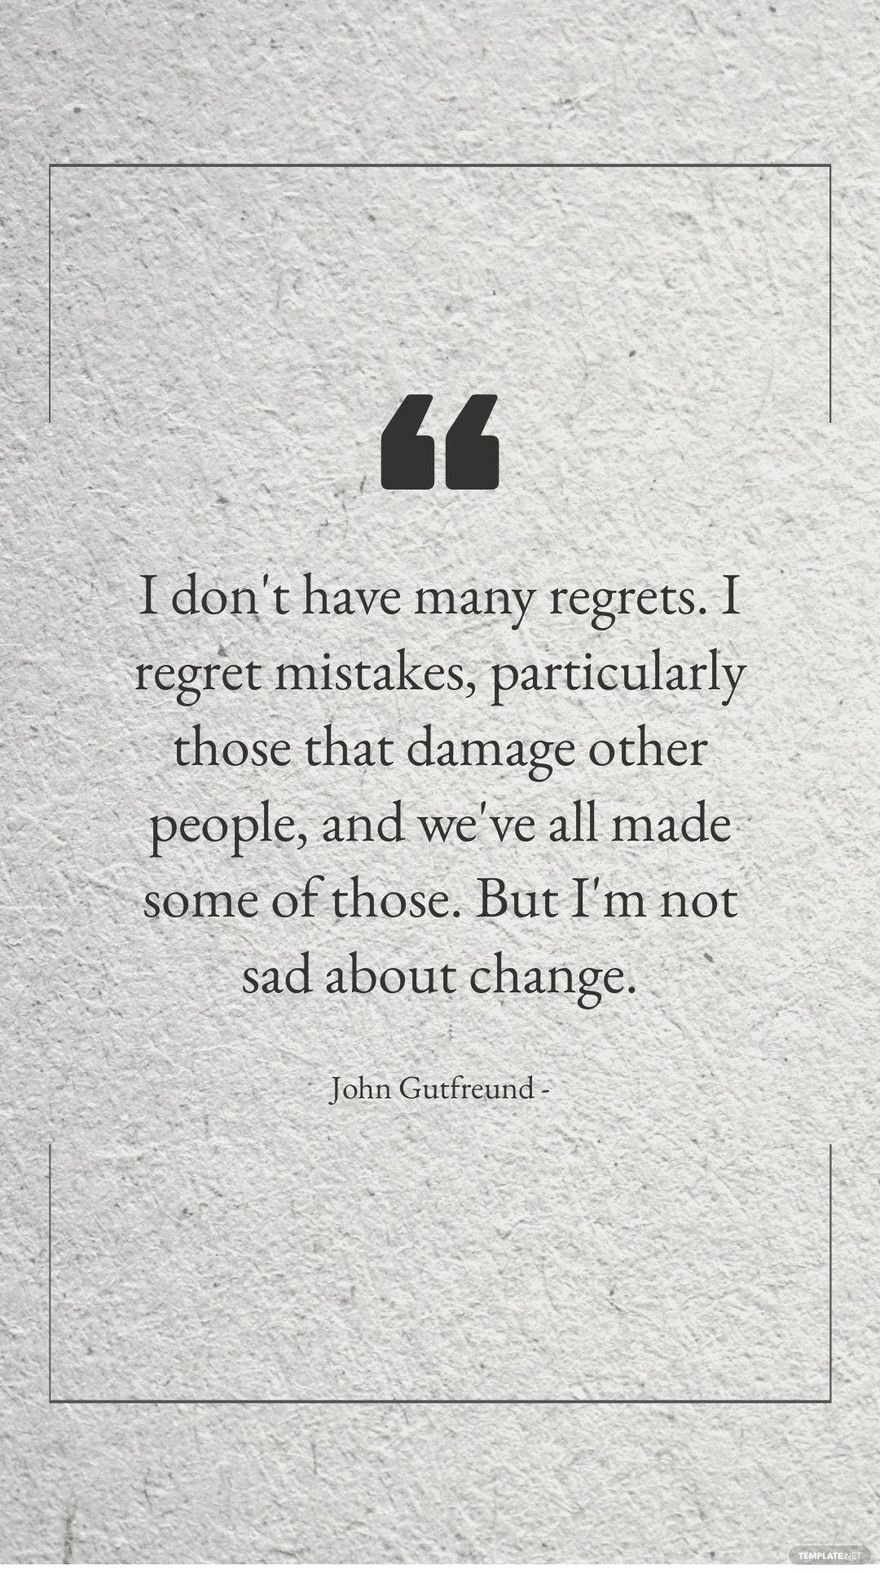 John Gutfreund - I don't have many regrets. I regret mistakes, particularly those that damage other people, and we've all made some of those. But I'm not sad about change.